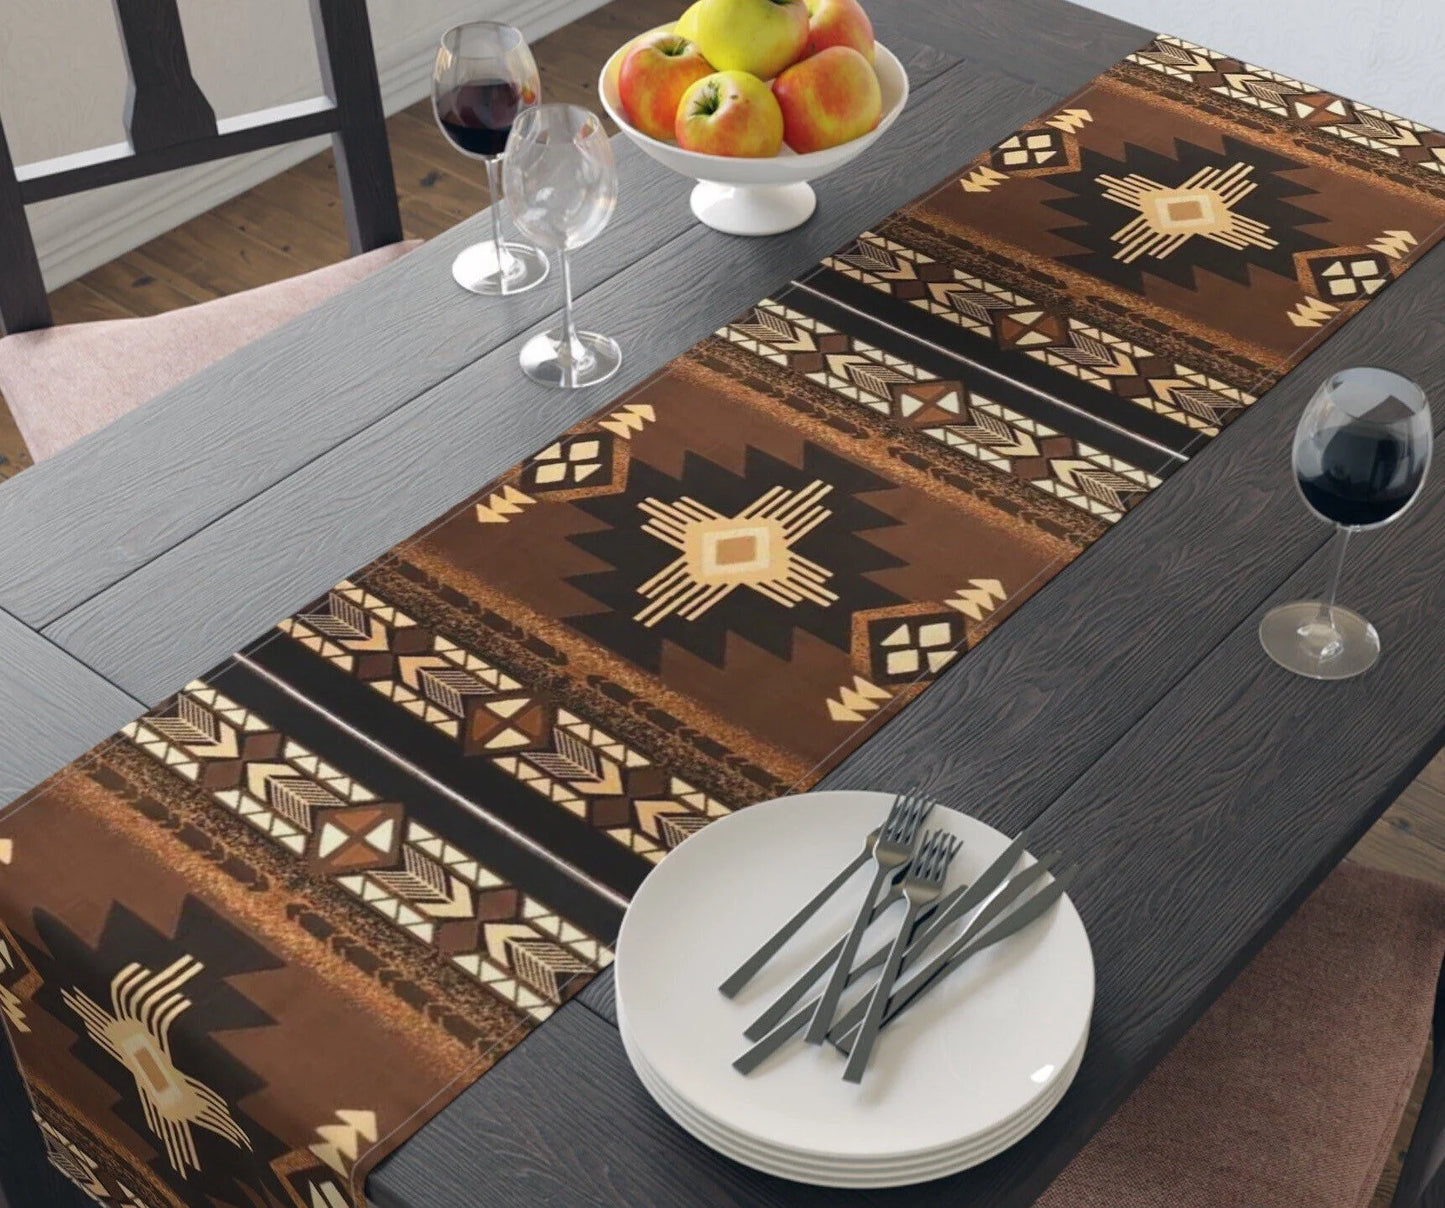 Aztec Table Runner for a Vibrant Kitchen